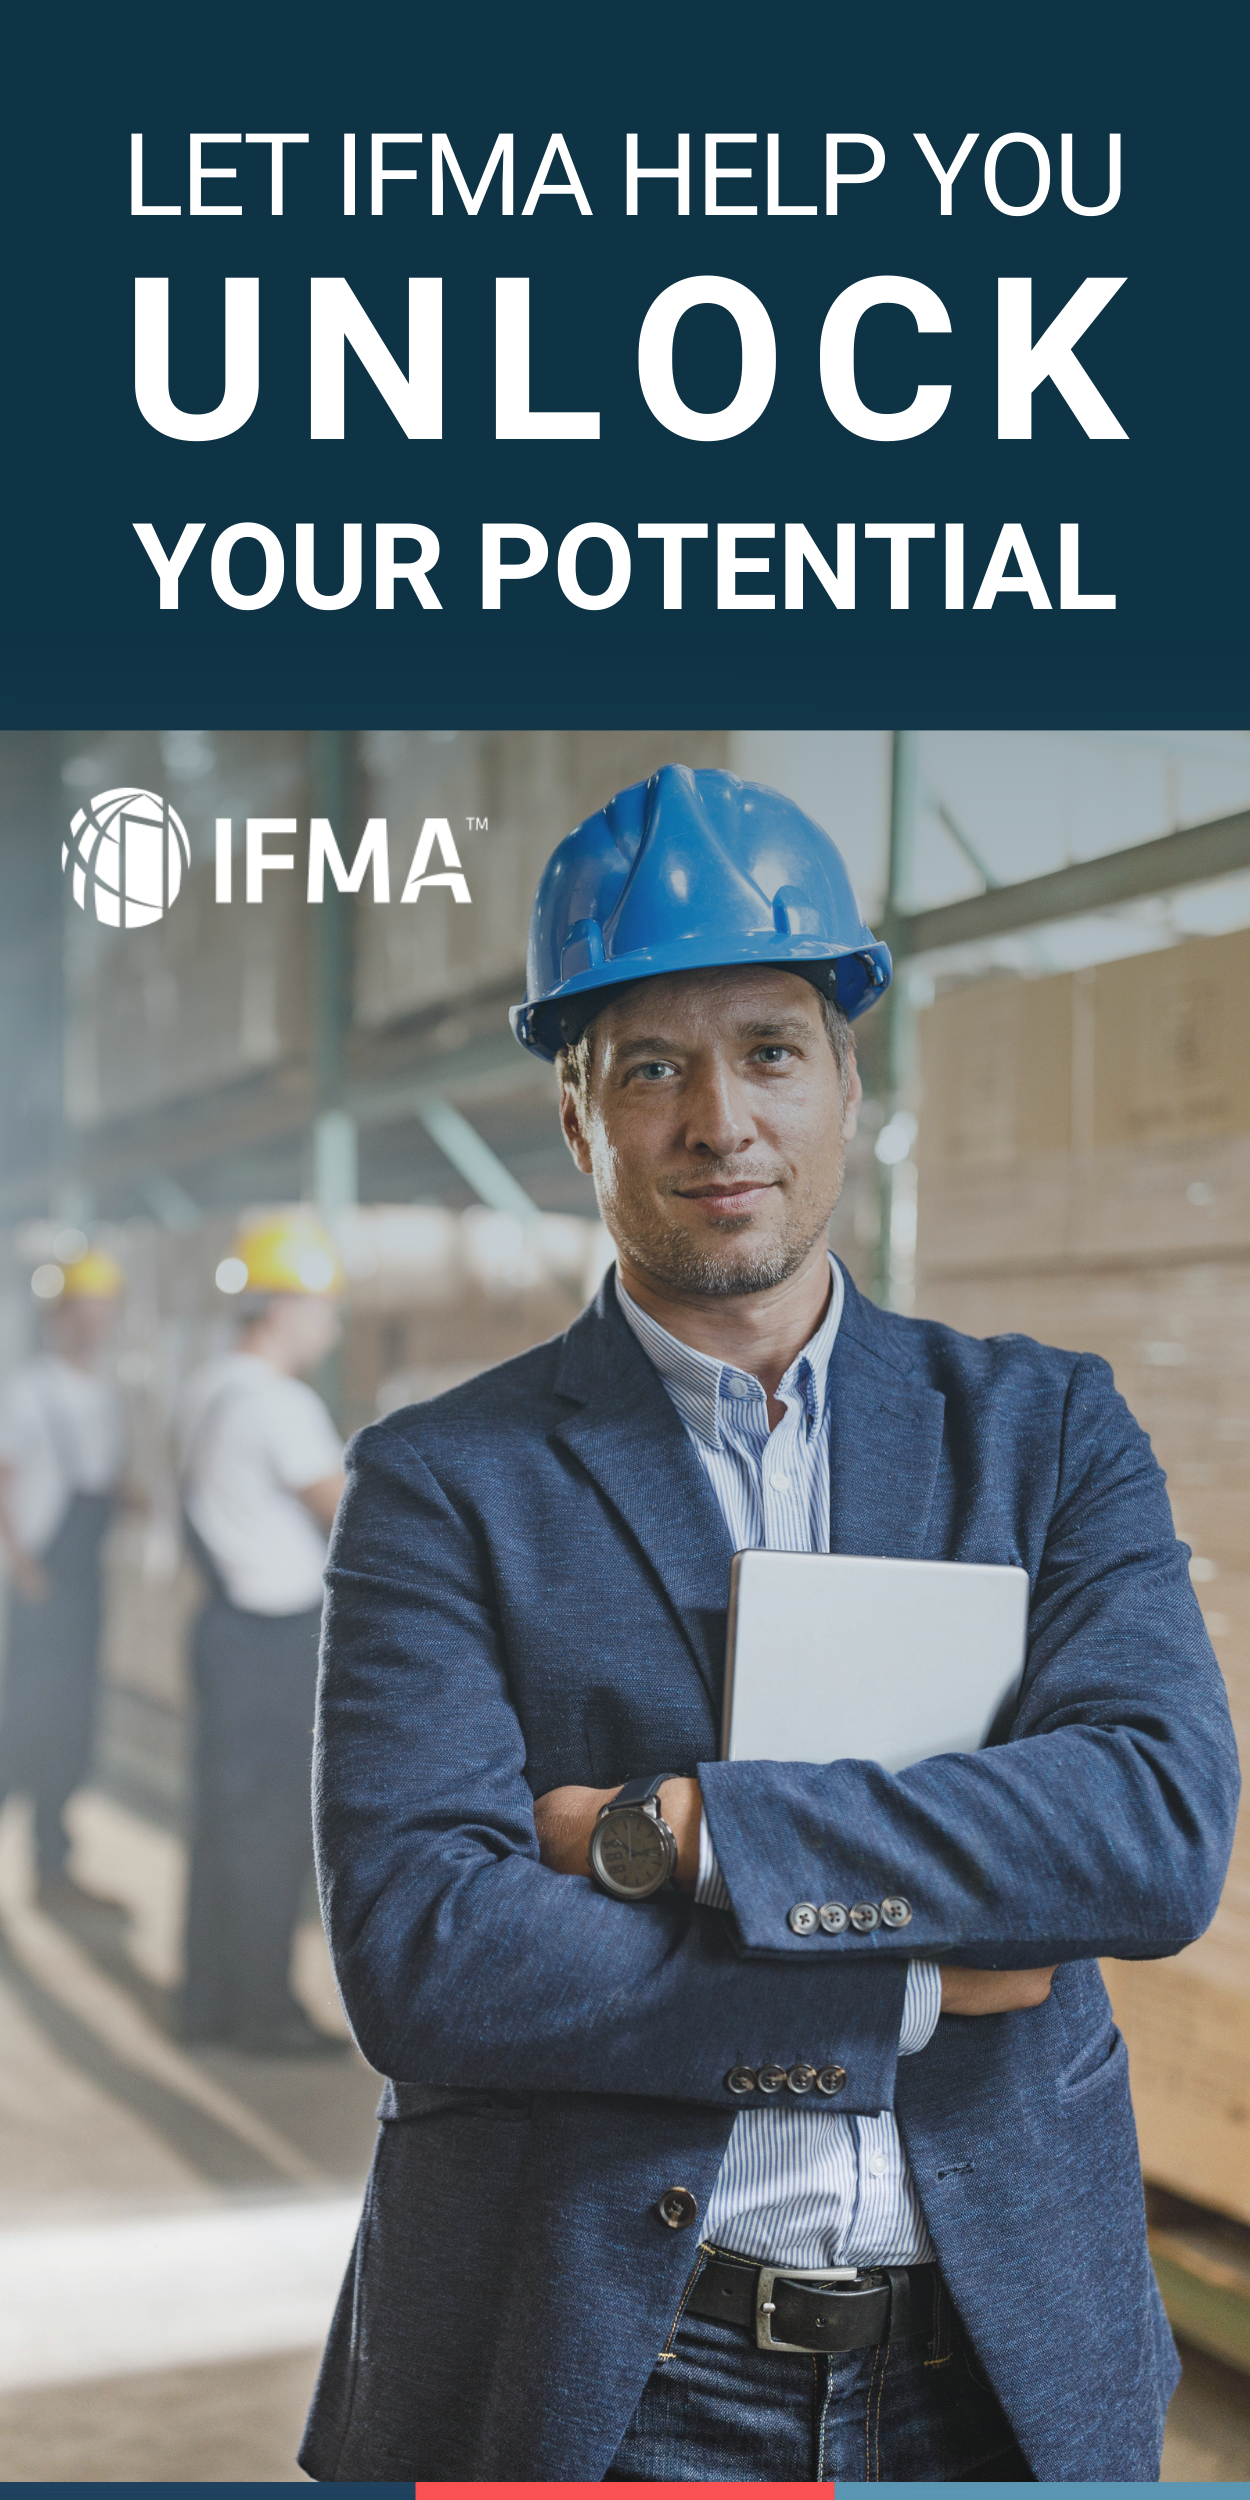 IFMA- become the FM expert – 2022